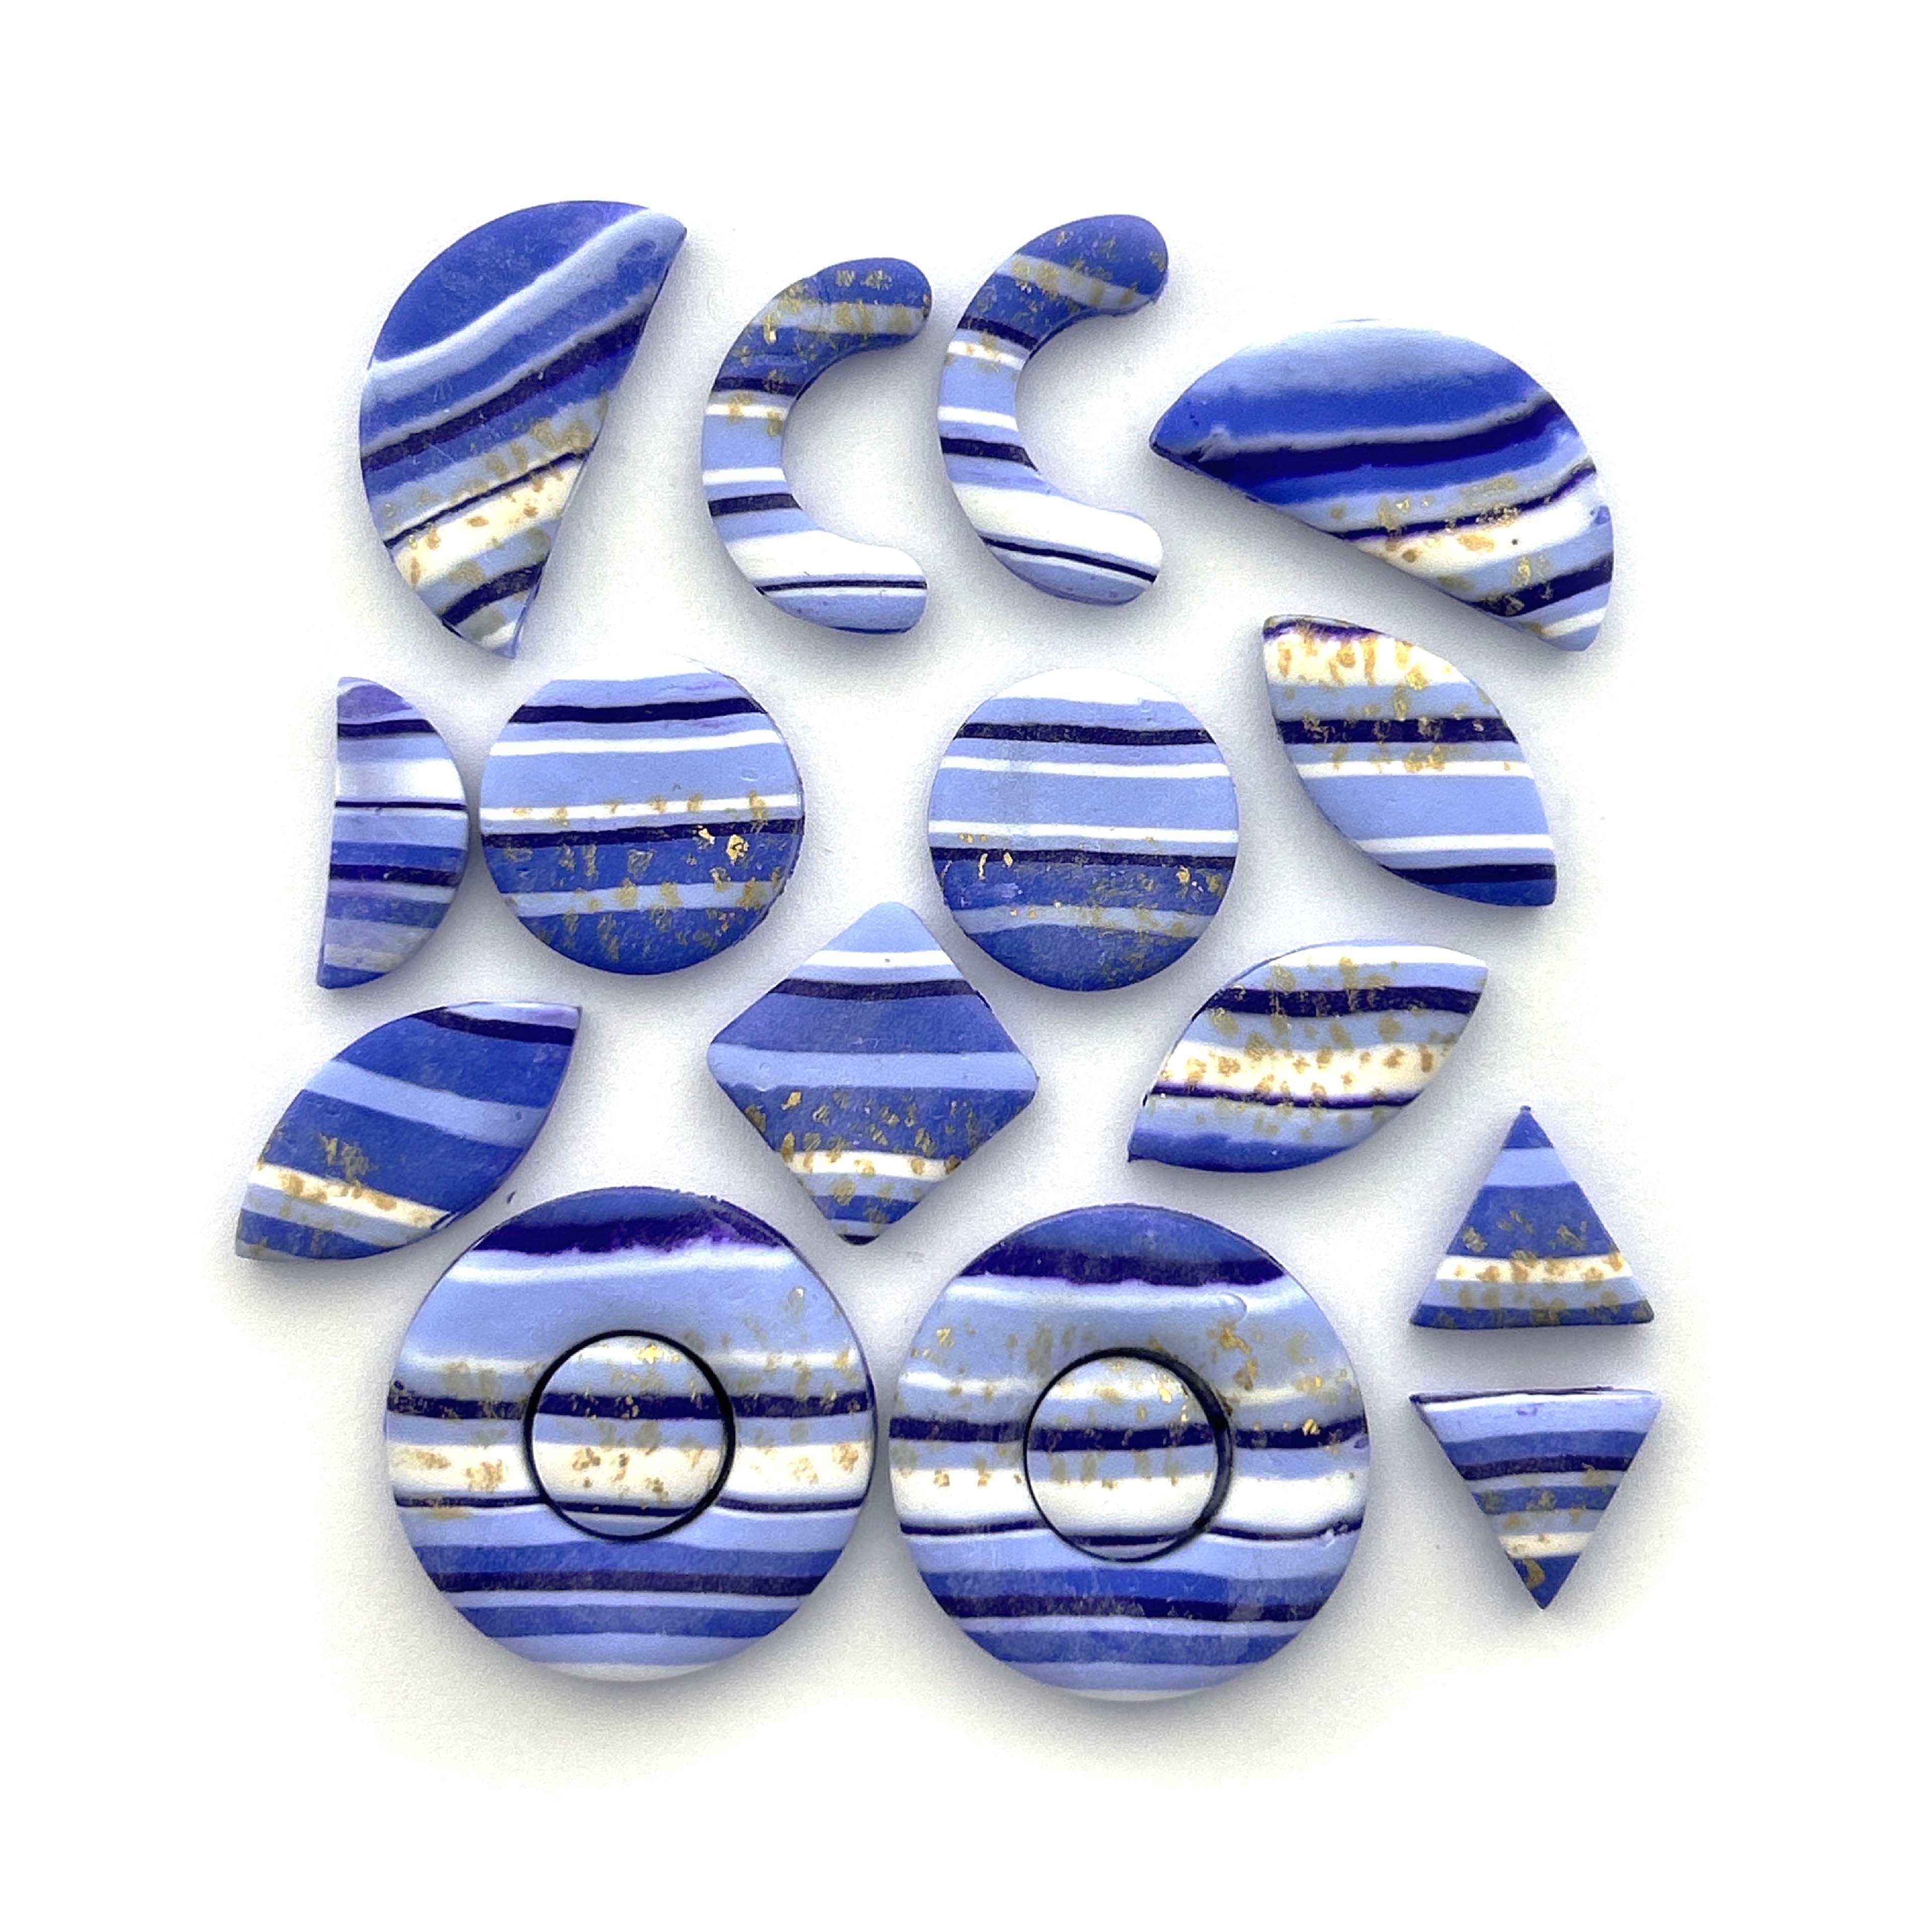 Blue Stripe with Foil Oven Bake Polymer Clay by Bead Landing&#x2122;